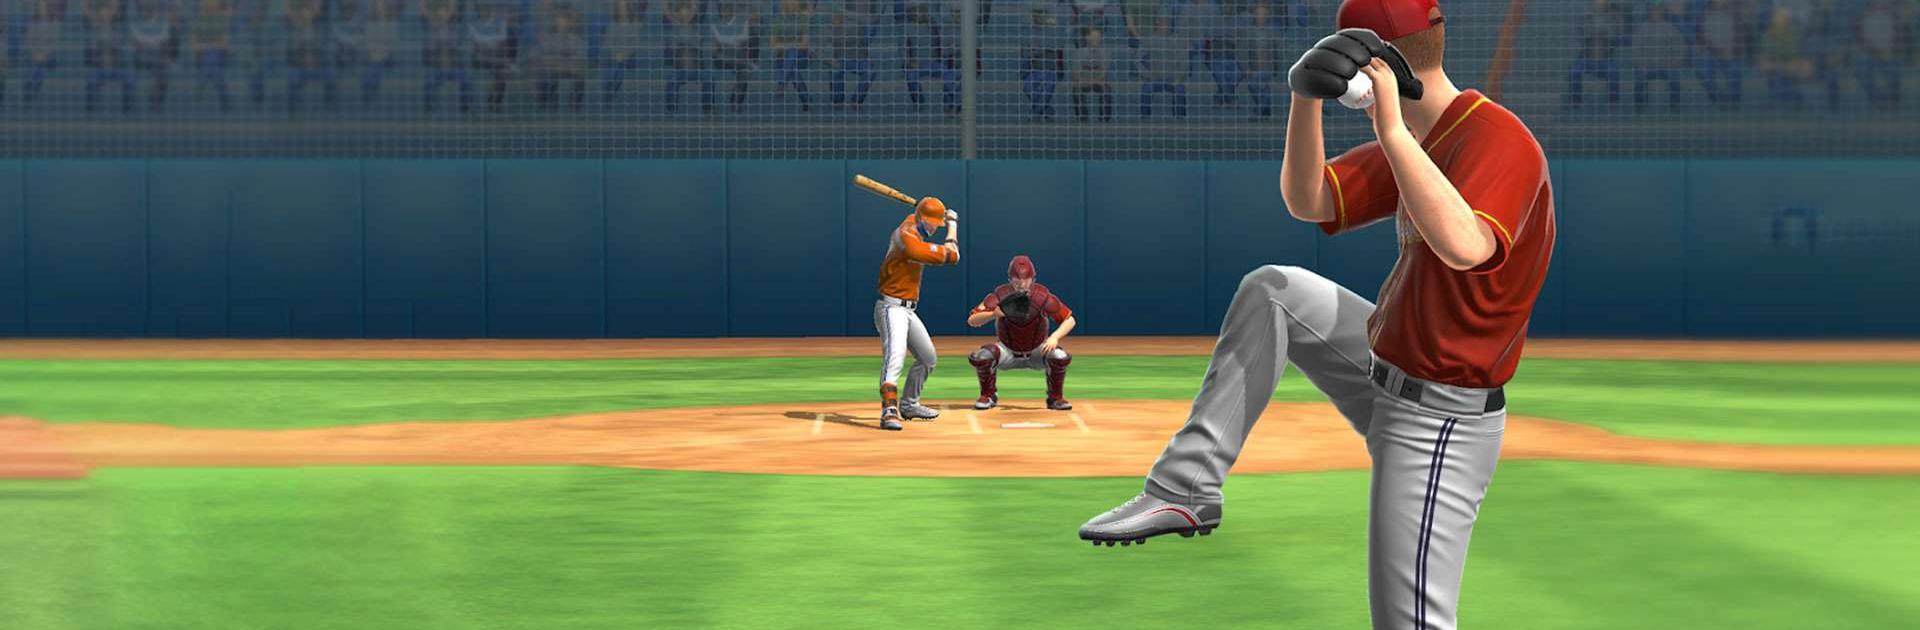 Download and Play Baseball Home Run Sport Game on PC and Mac (Emulator)